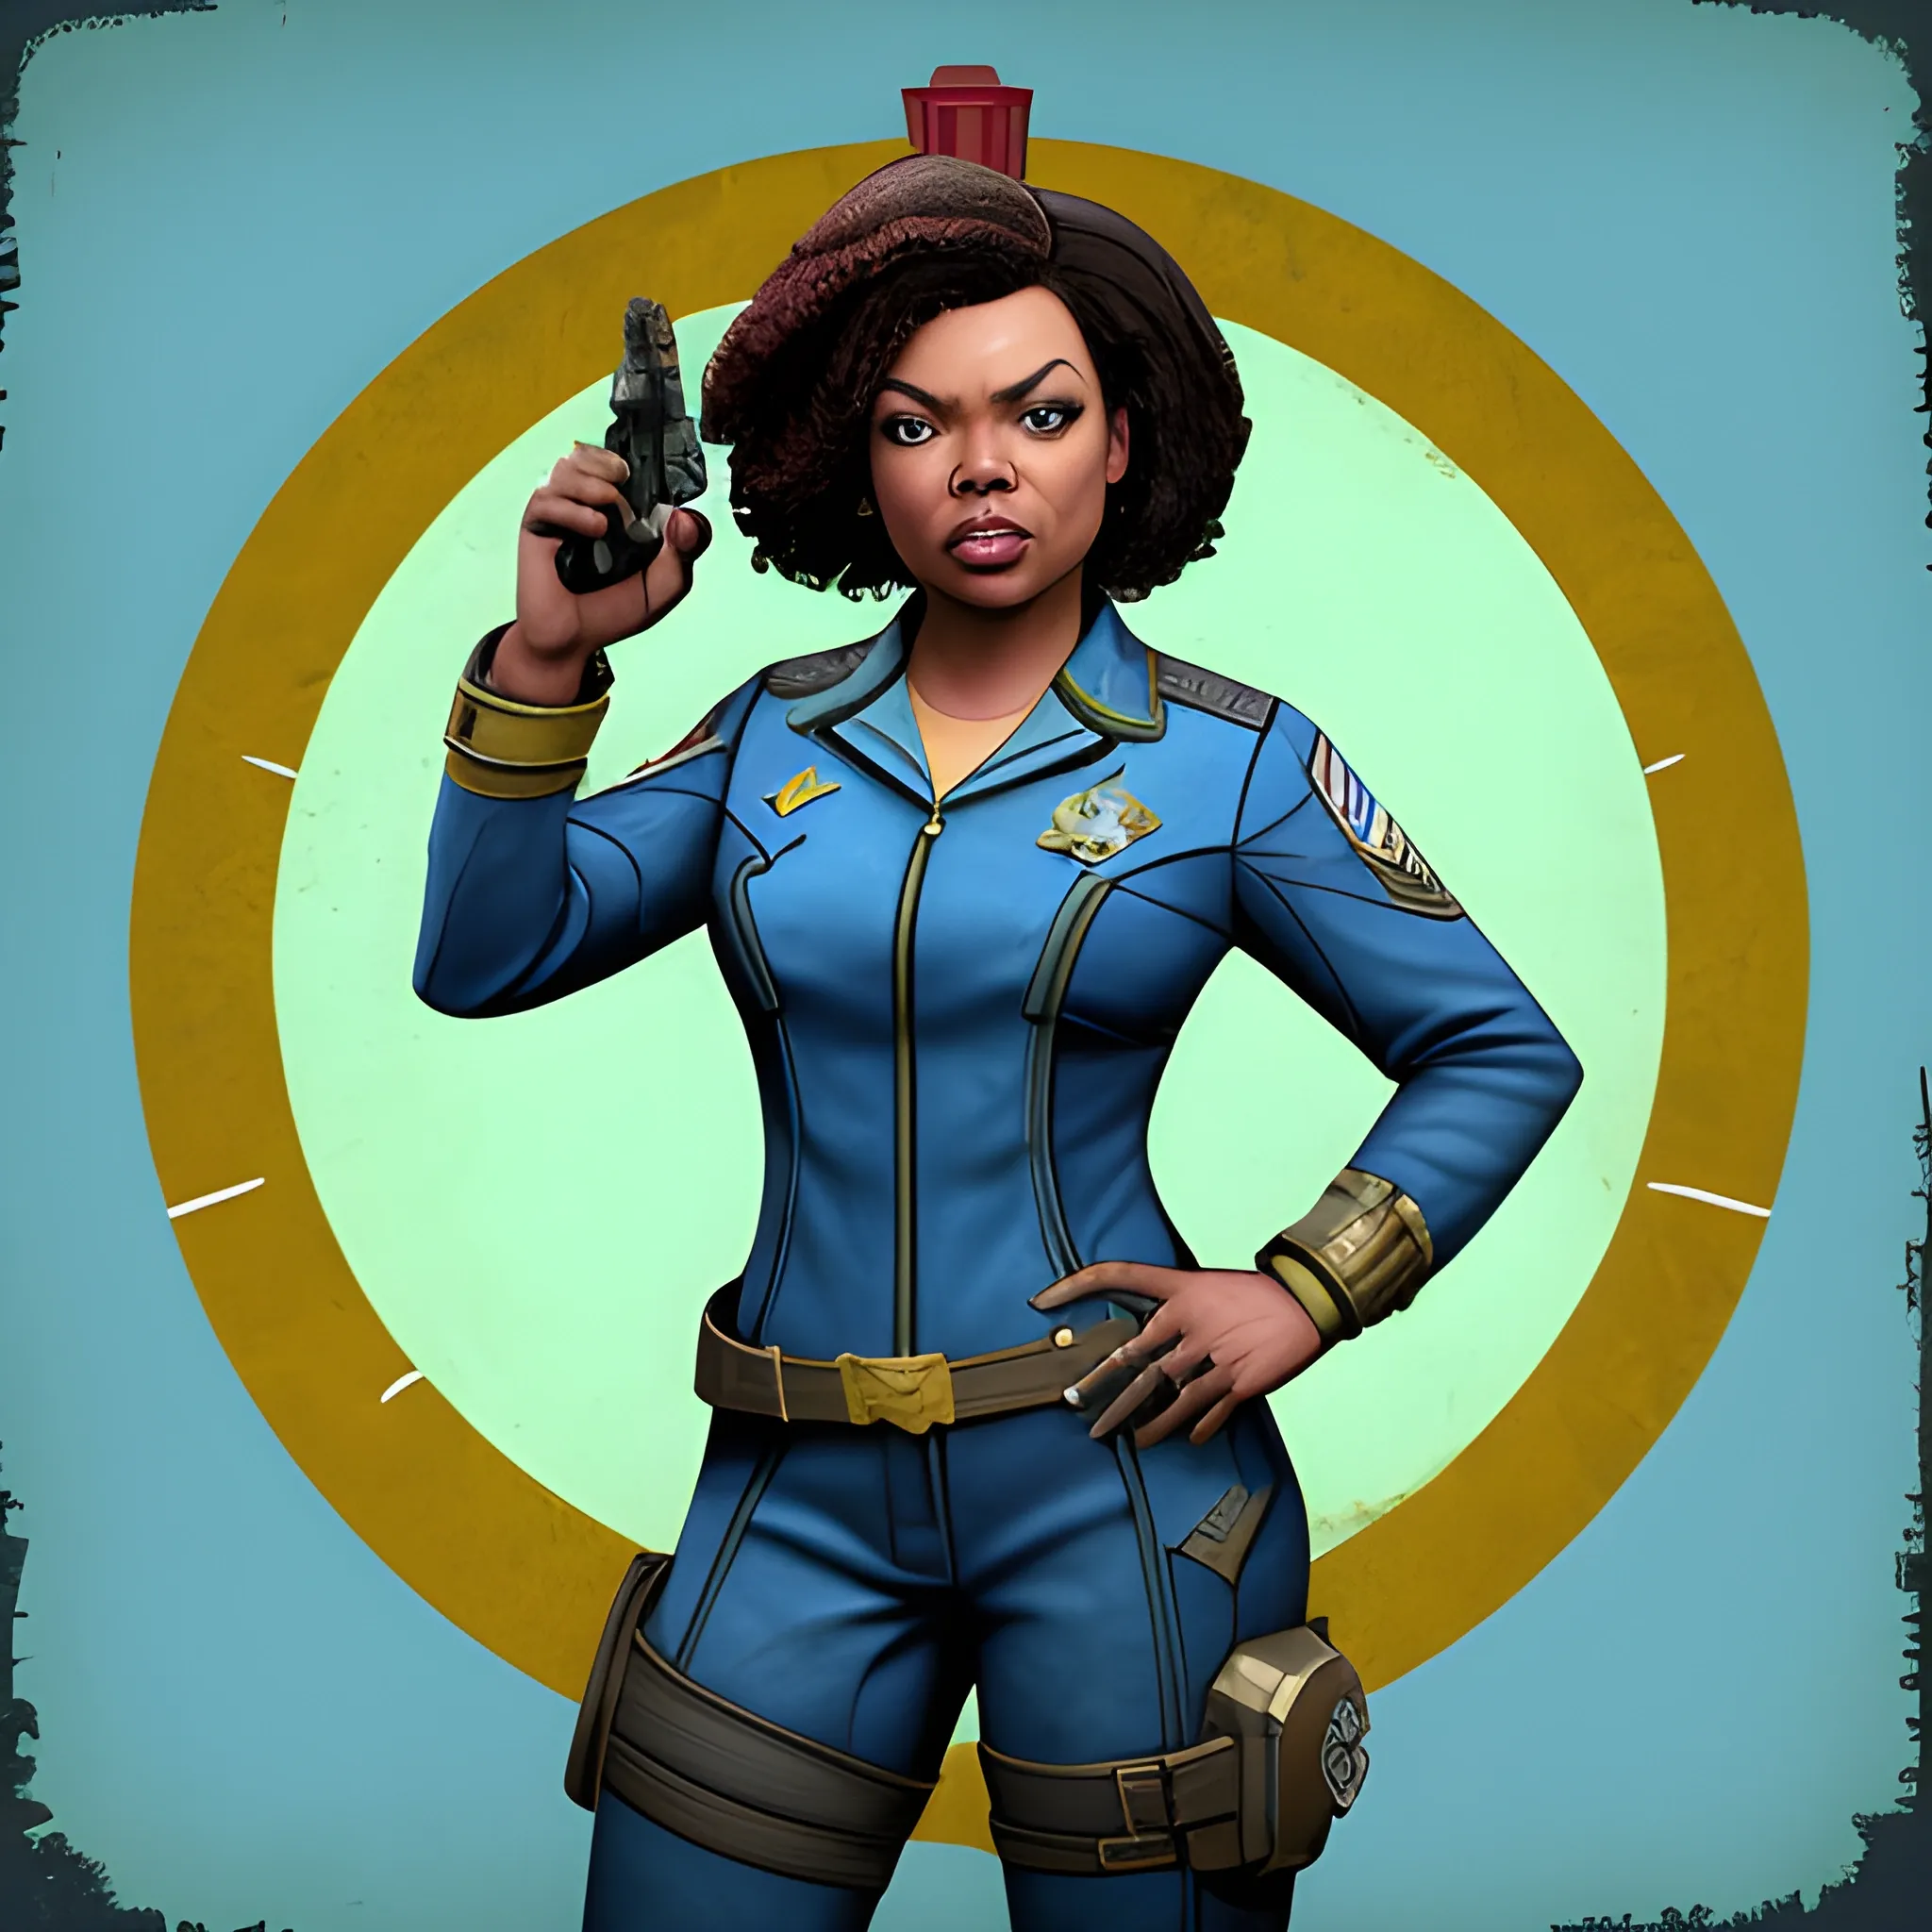 In the style of Fallout New Vegas, masterpiece, Yvette Nicole Brown, Allion brie, Gillian Jacobs as vault dwellers in blue vault suit